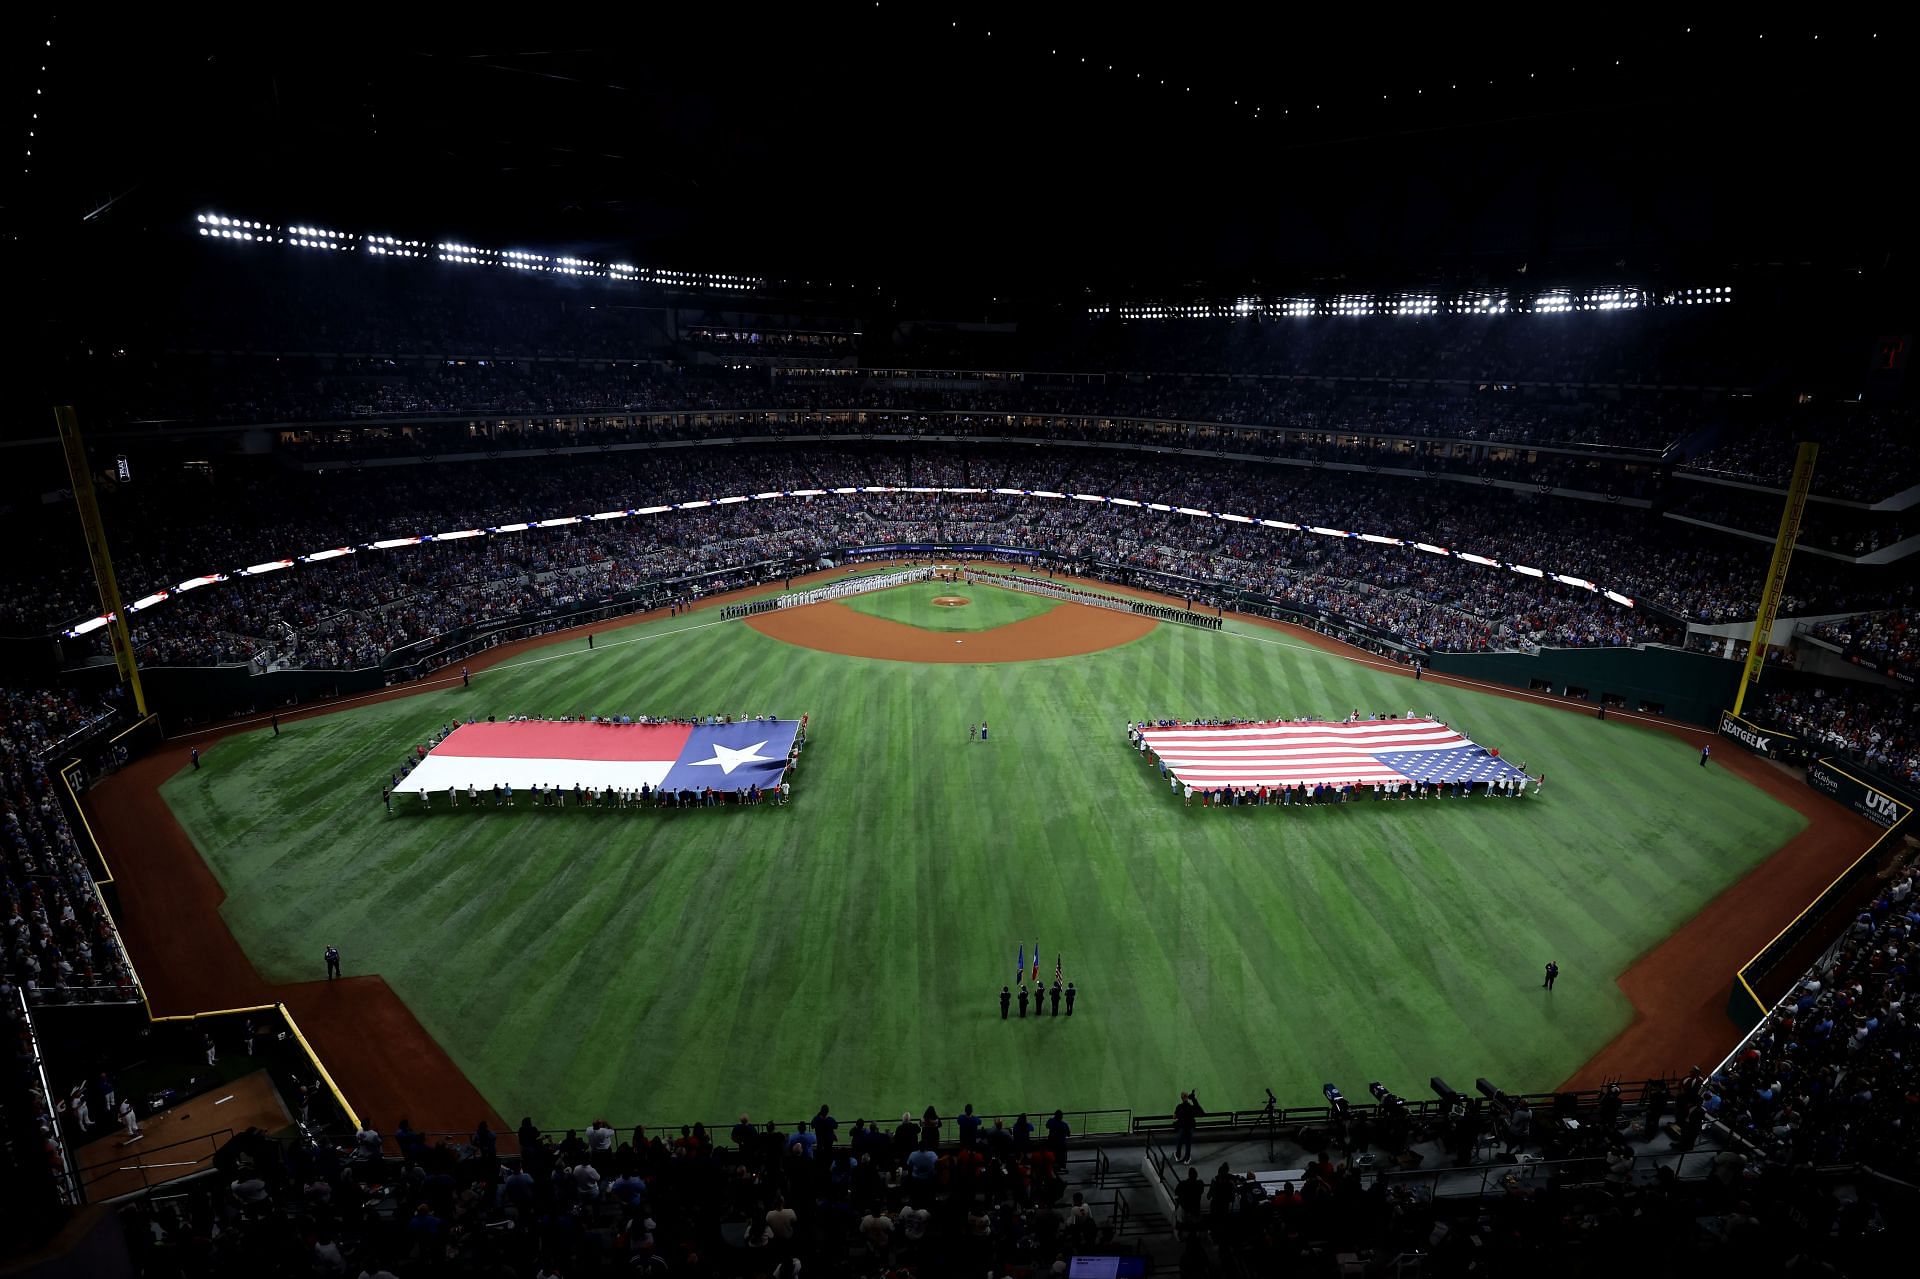 The Texas Rangers will host the All-Star Game